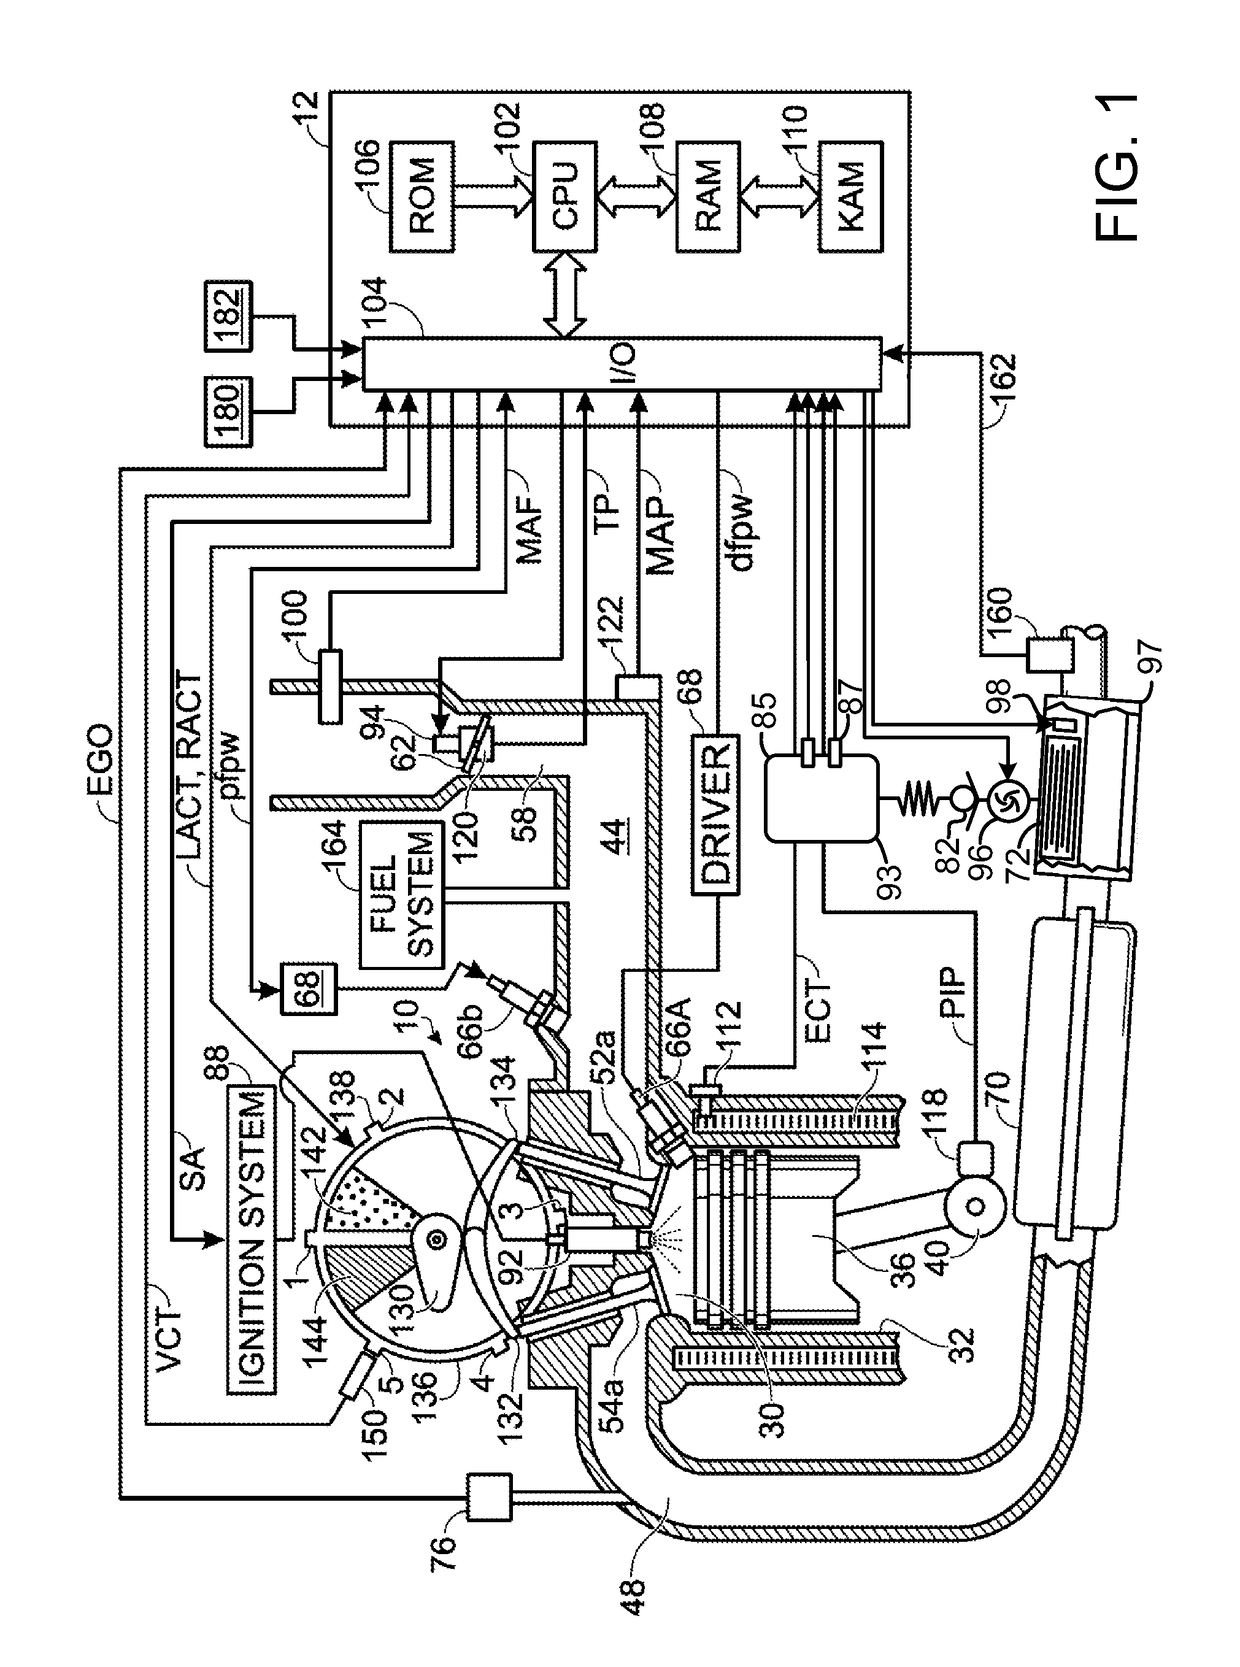 Fuel injector diagnostic for dual fuel engine